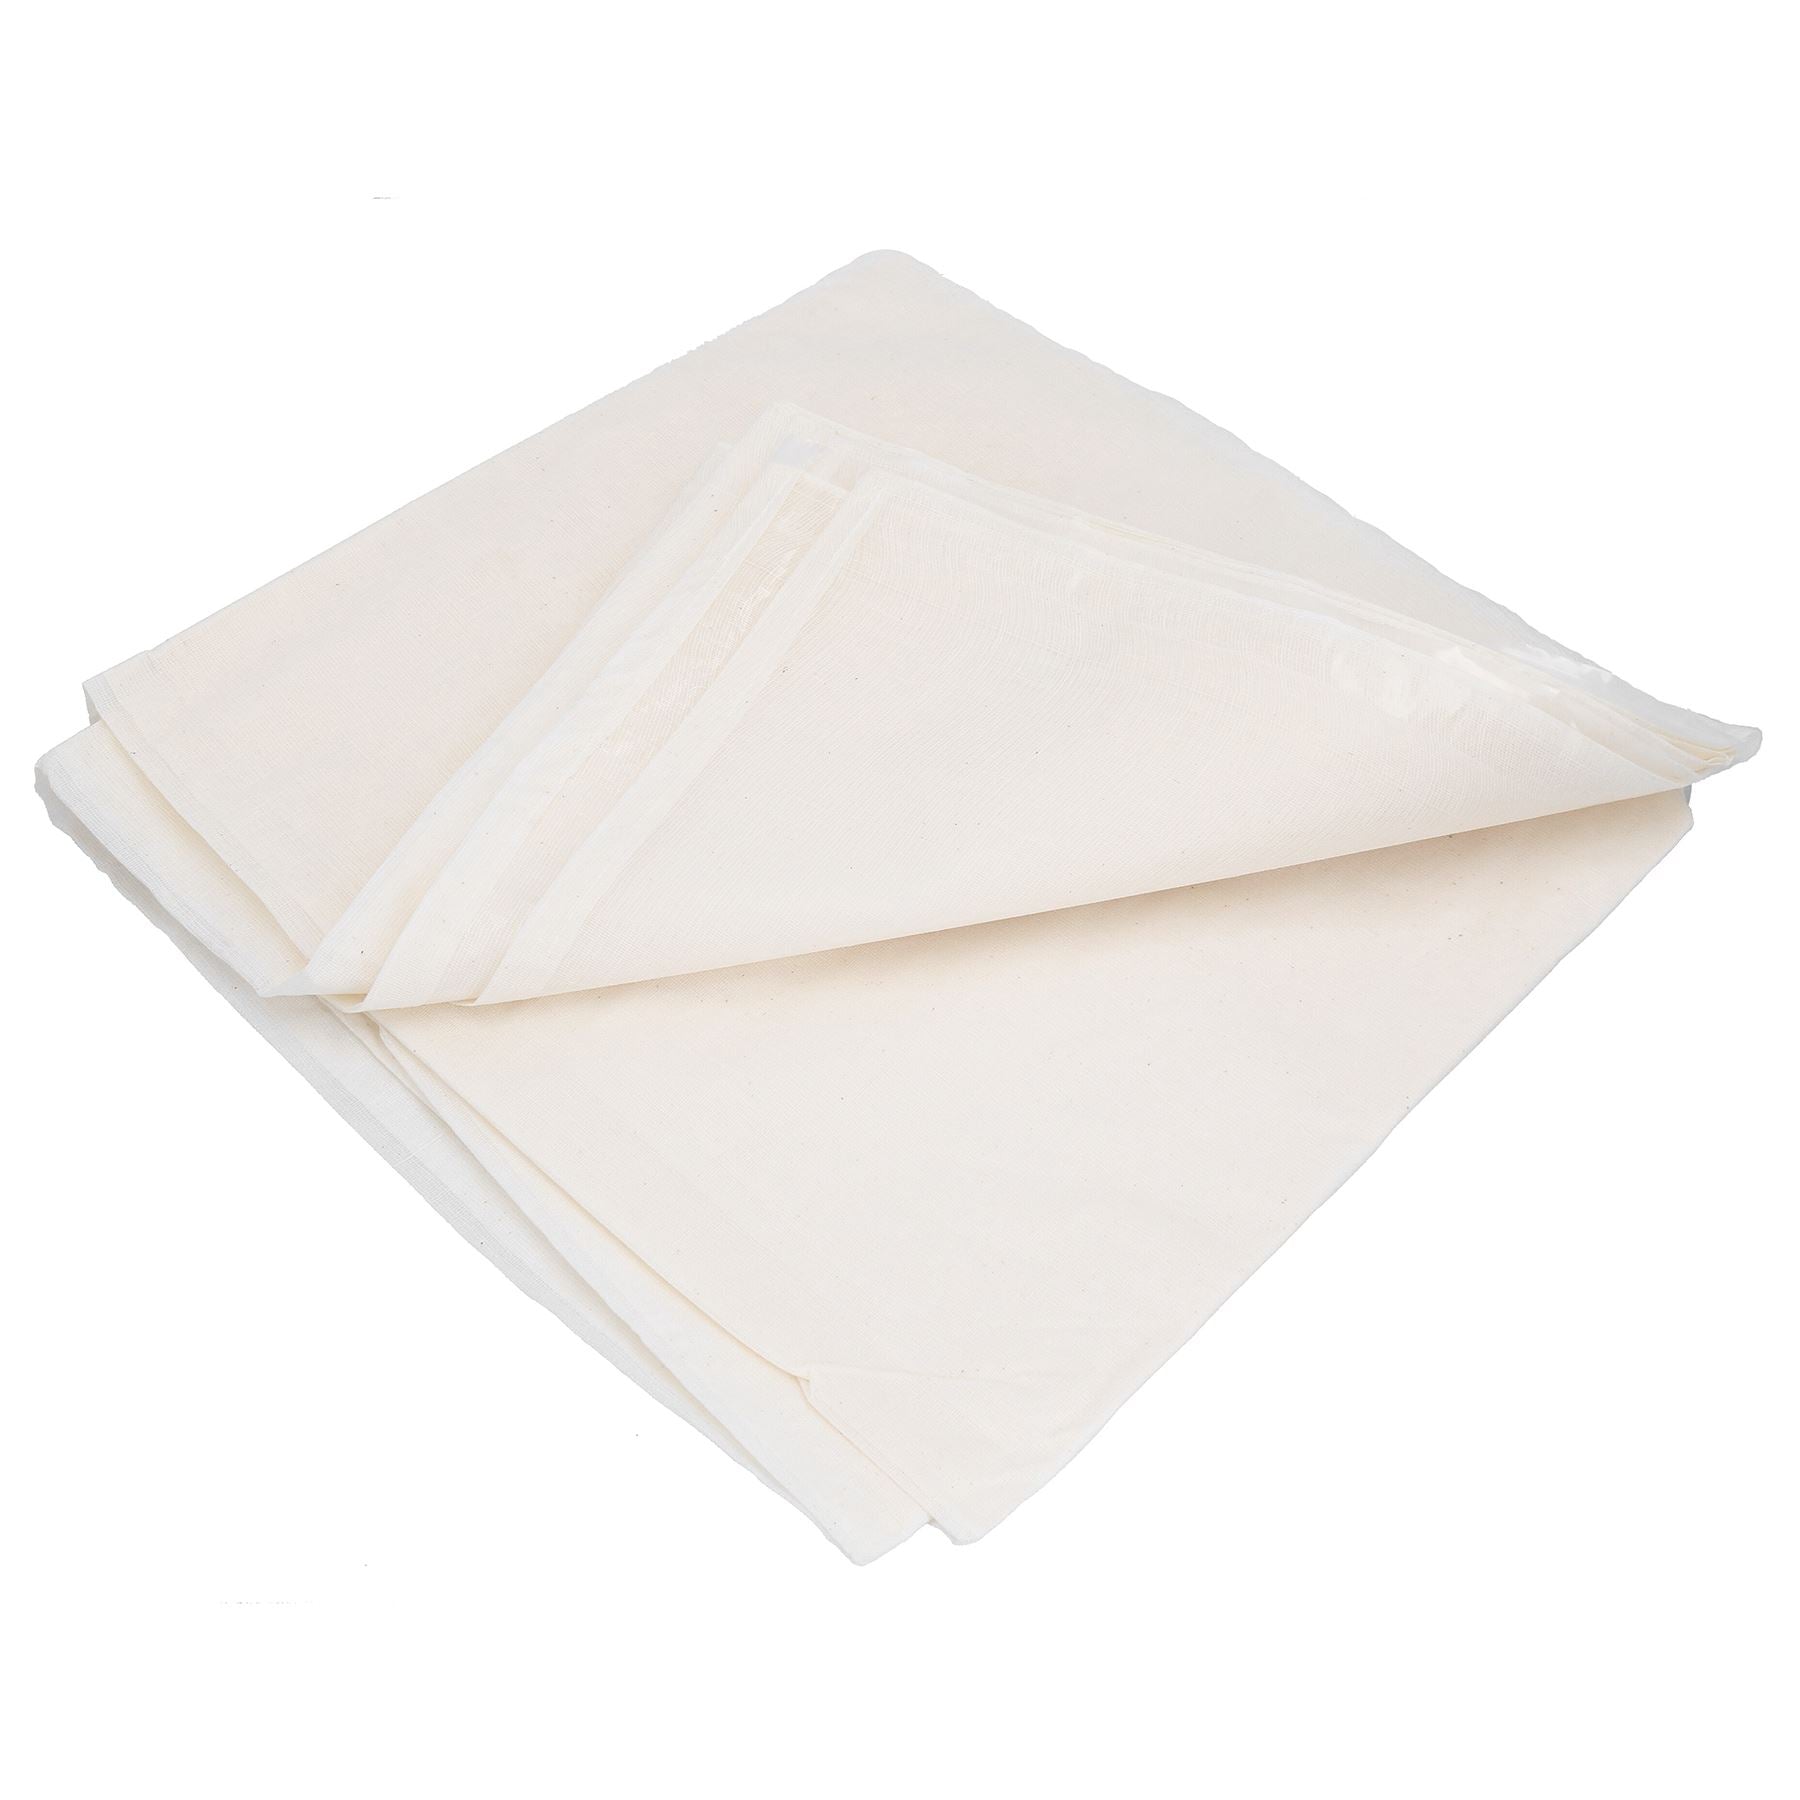 Cotton Dust Sheets Double Protection Polythene Backing Decorating 10 x 8 Feet